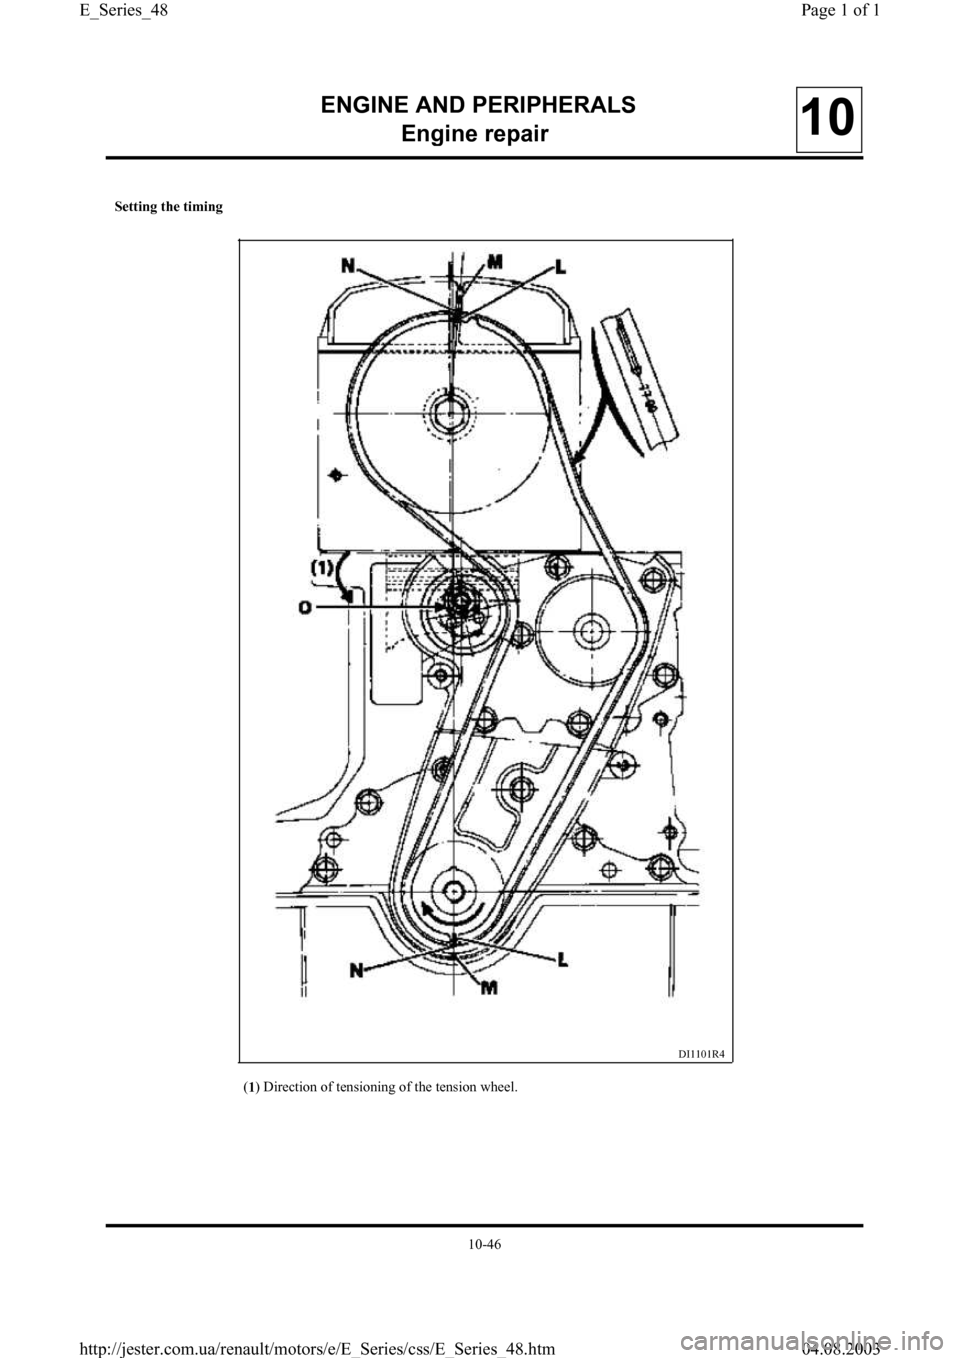 RENAULT CLIO 1997 X57 / 1.G Petrol Engines Service Manual ENGINE AND PERIPHERALS
En
gine repair10
Setting the timing
DI1101R4
(
1) Direction of tensioning of the tension wheel.
10-46
Page 1 of 1 E_Series_48
04.08.2003 http://jester.com.ua/renault/motors/e/E_